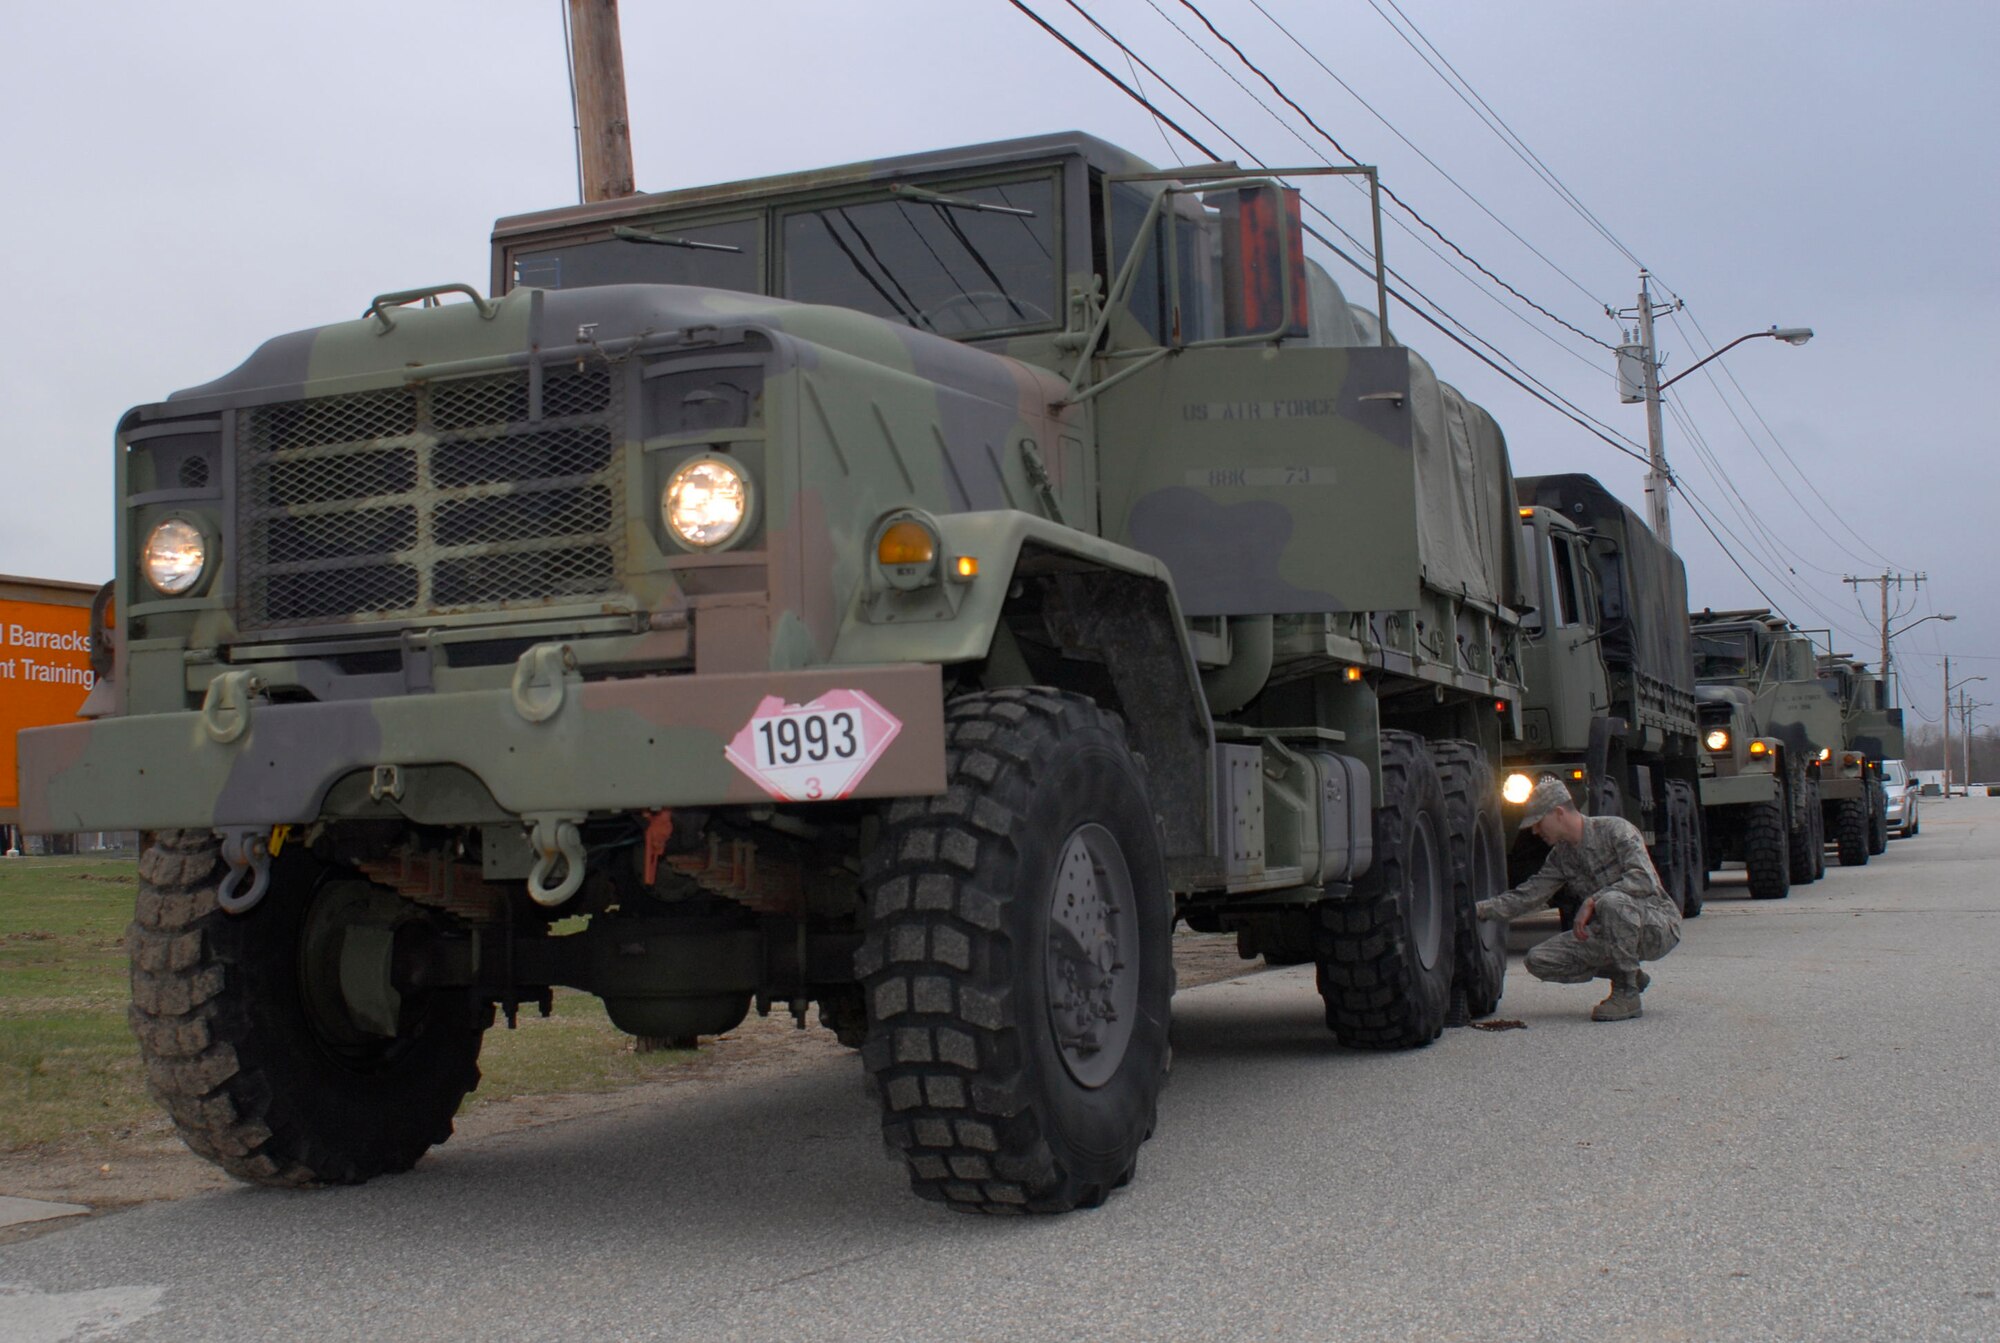 Senior Airman Christopher Devine inspects the wheel of his light medium tactical vehicle as the 103rd Air Control Squadron prepares to convoy back to Orange, Conn. after remaining on alert status at Camp Rell, Niantic, Conn. in support of flood relief March 31, 2010. Part of the 103rd Task Force, Devine’s mission capability included using the LMTVs to rescue people trapped because of high waters. (U.S. Air Force photo by Tech. Sgt. Joshua Mead)